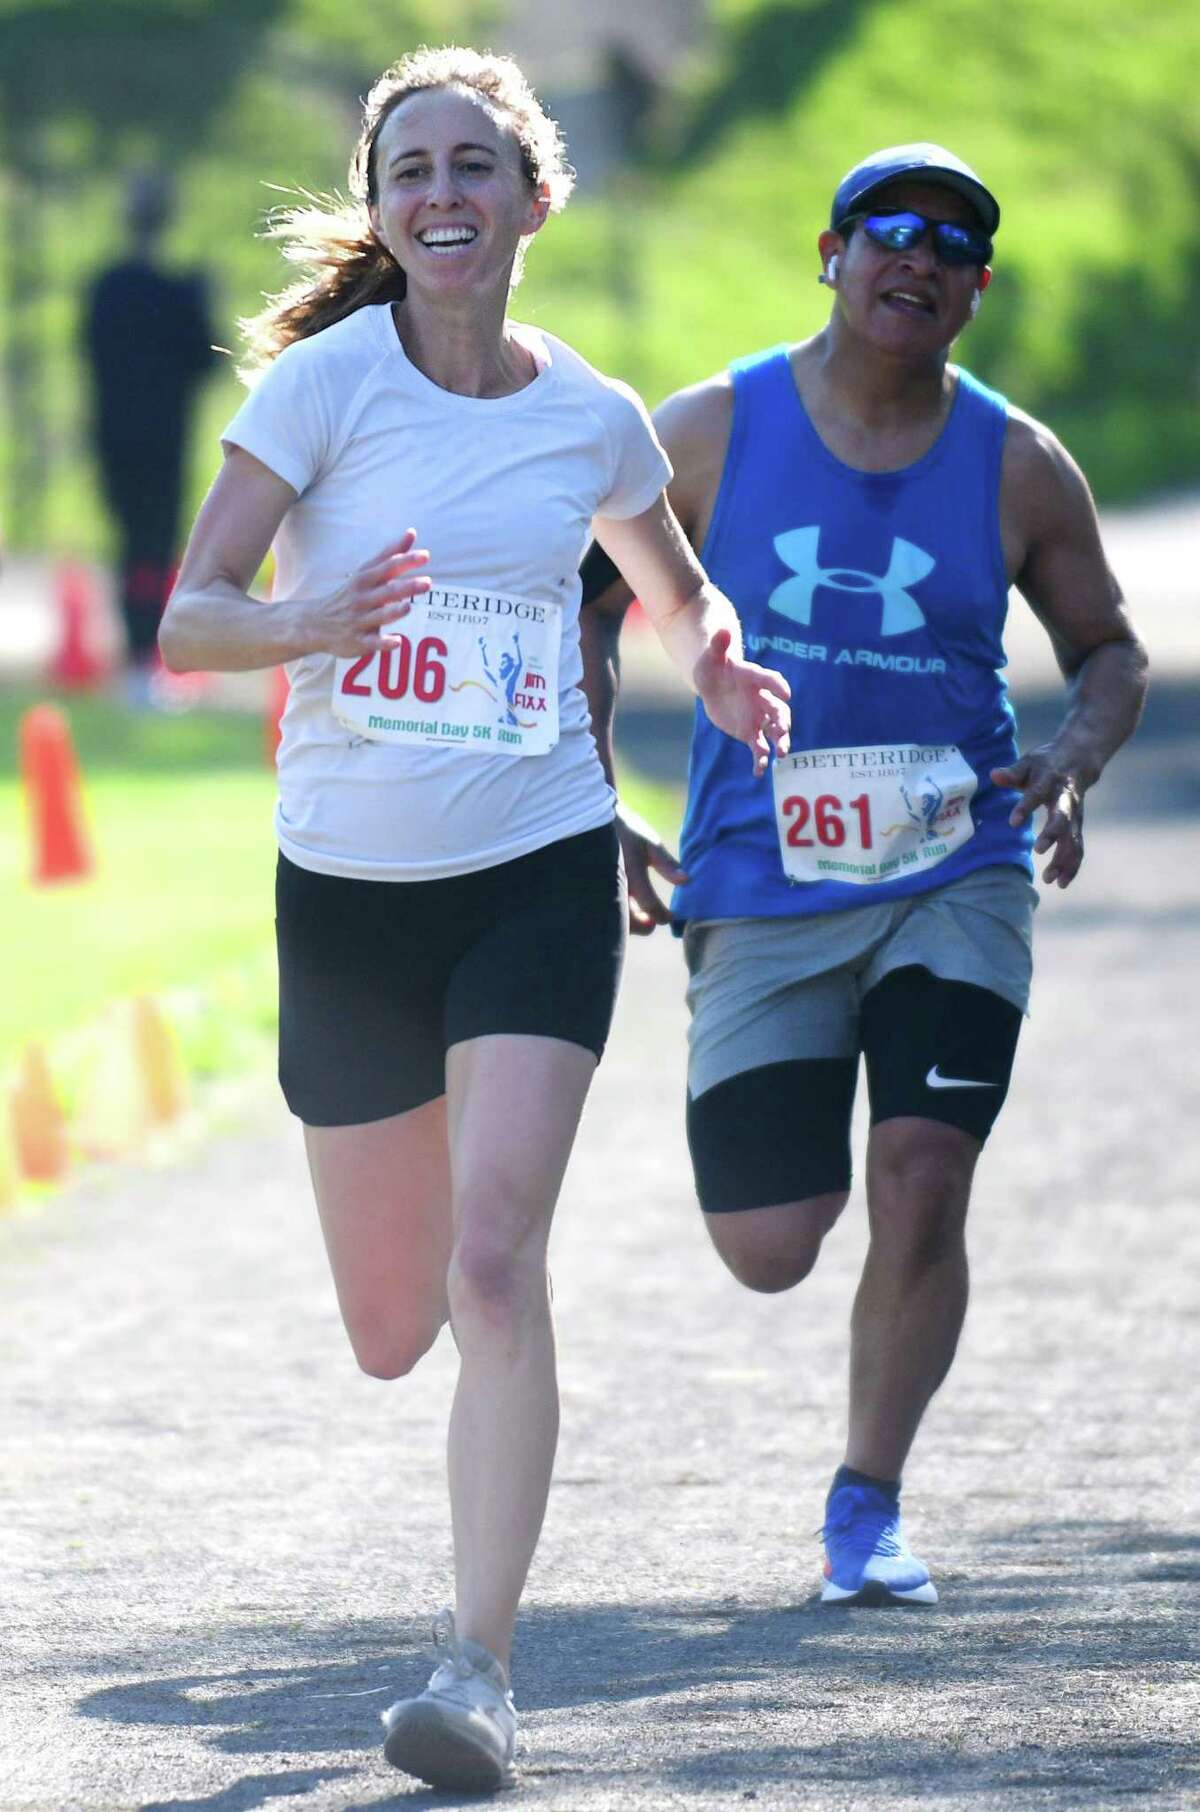 Greenwich's Kelly Annunziato finishes first place among women with a time of 21:25 in the Jim Fixx Memorial Day 5K Run in Greenwich, Conn. Monday, May 30, 2022. More than 200 runners competed in the 5K with Cos Cob's Asher Beck finishing first overall and Greenwich's Kelly Annunziato finishing first among women.